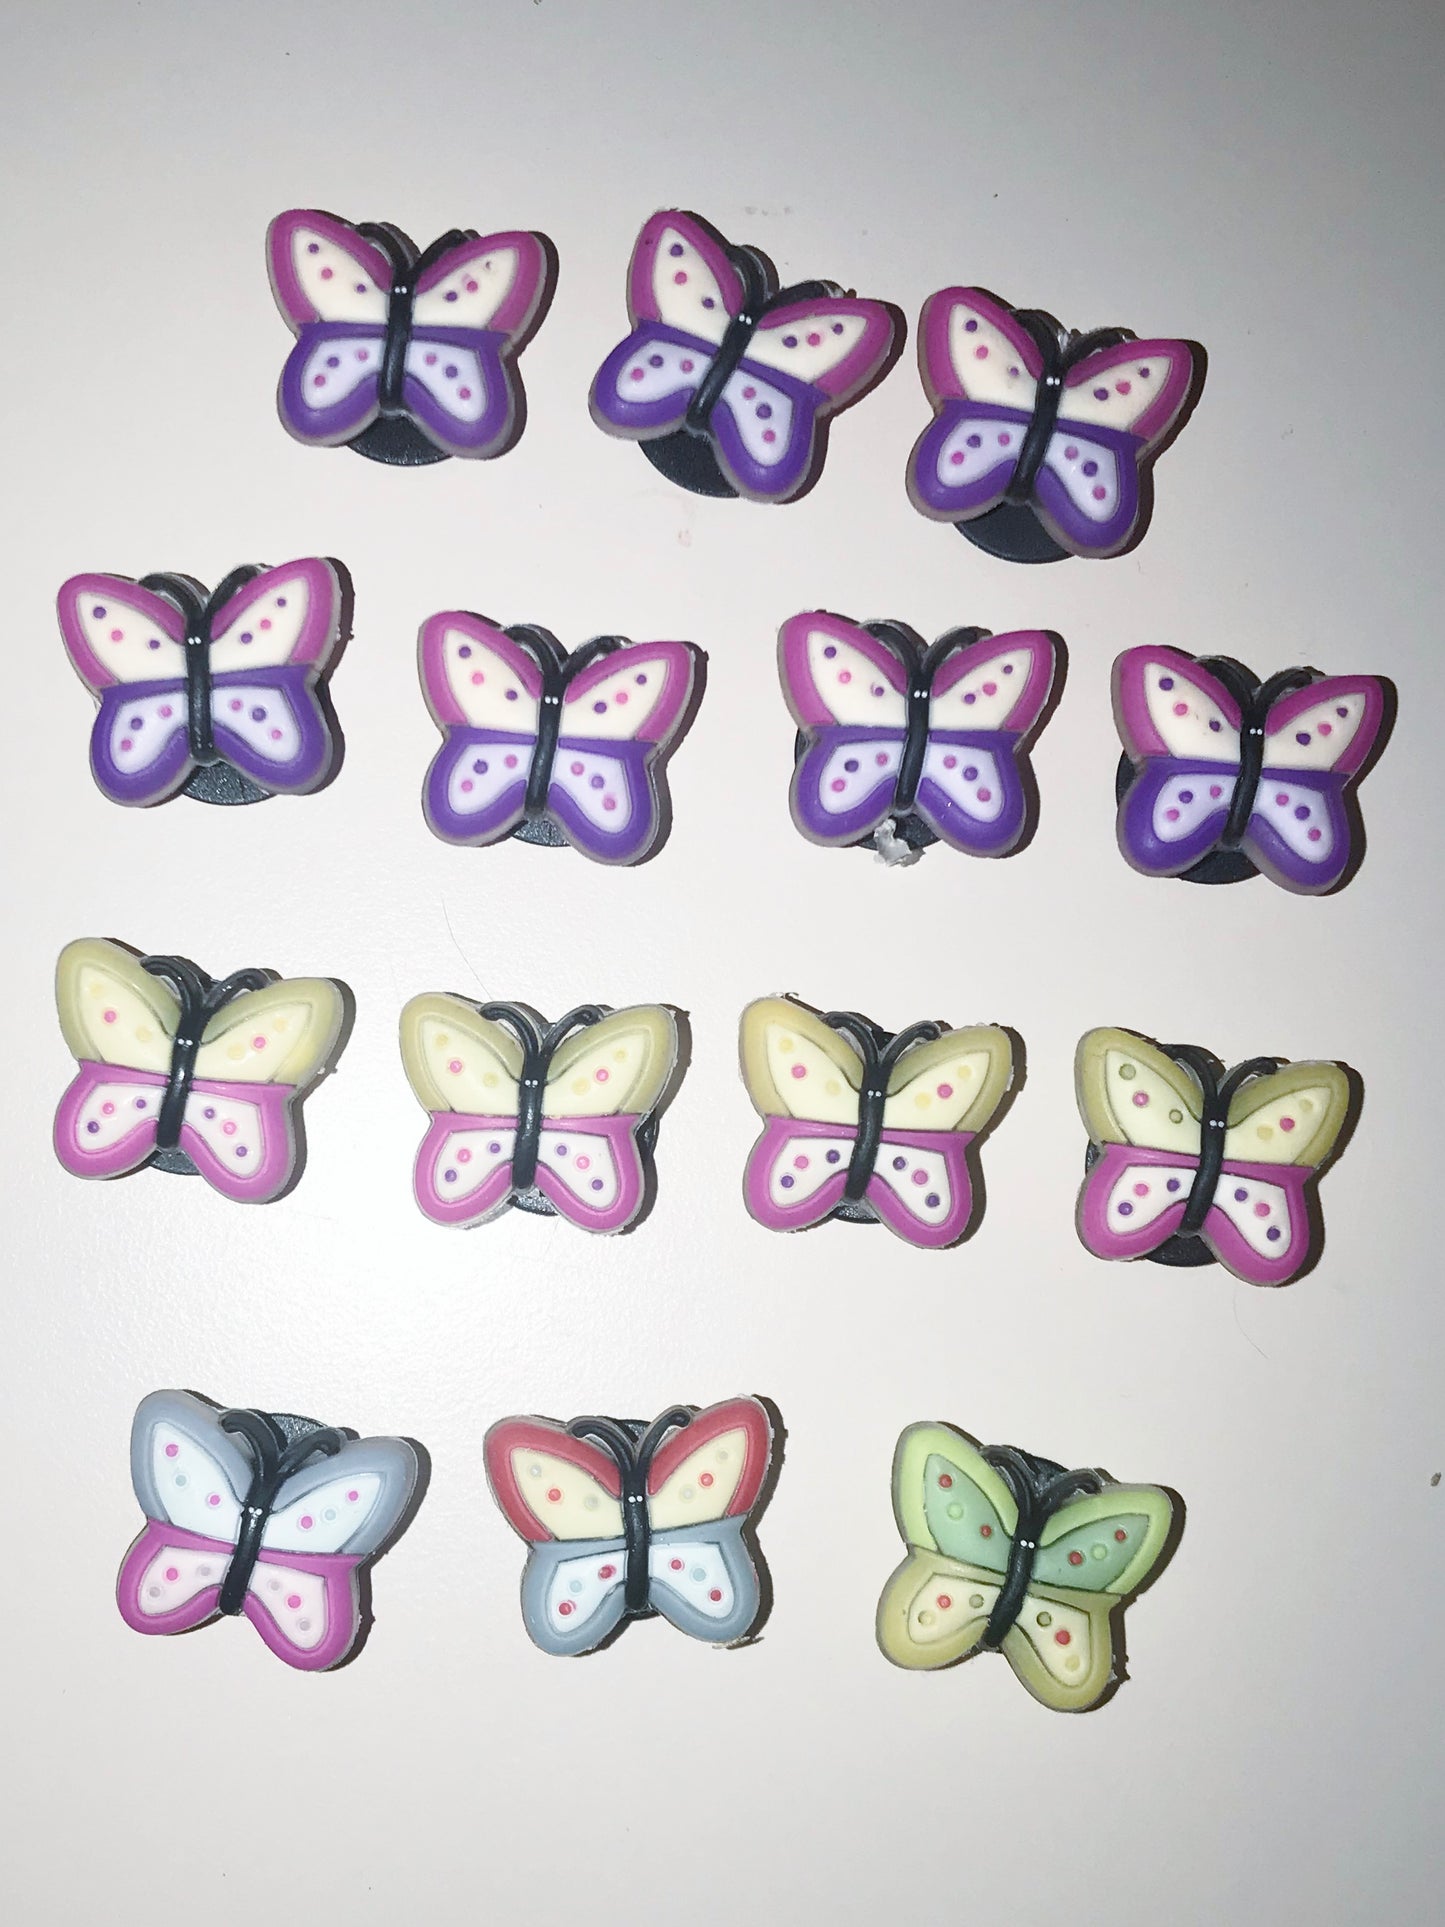 Authentic limited stock shoe charms from 06-07, butterfly, princess